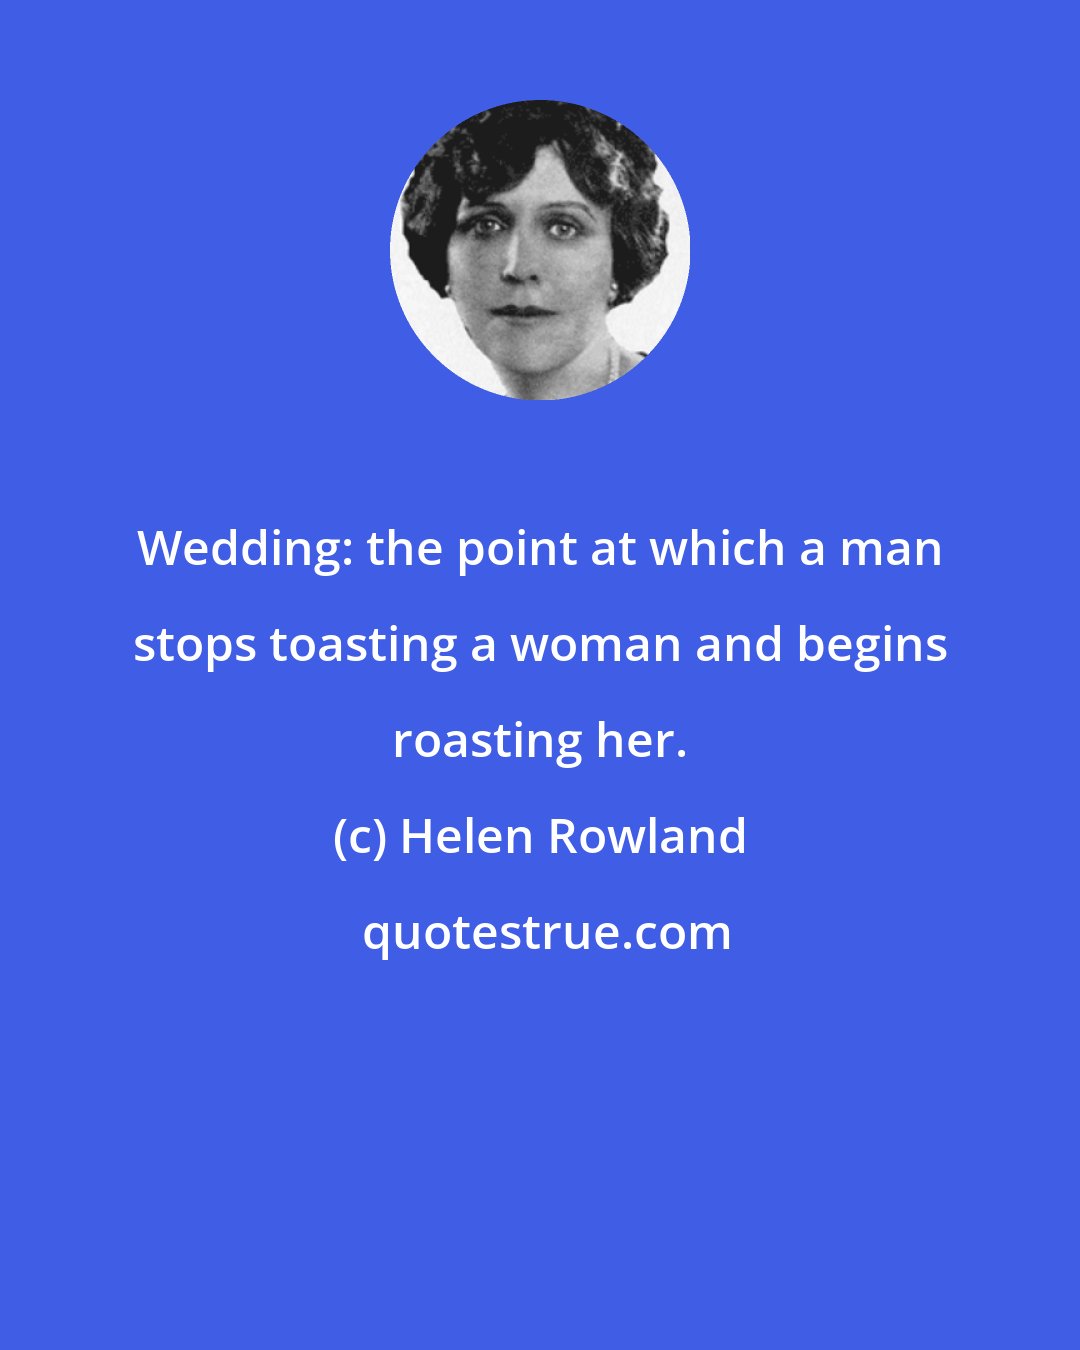 Helen Rowland: Wedding: the point at which a man stops toasting a woman and begins roasting her.